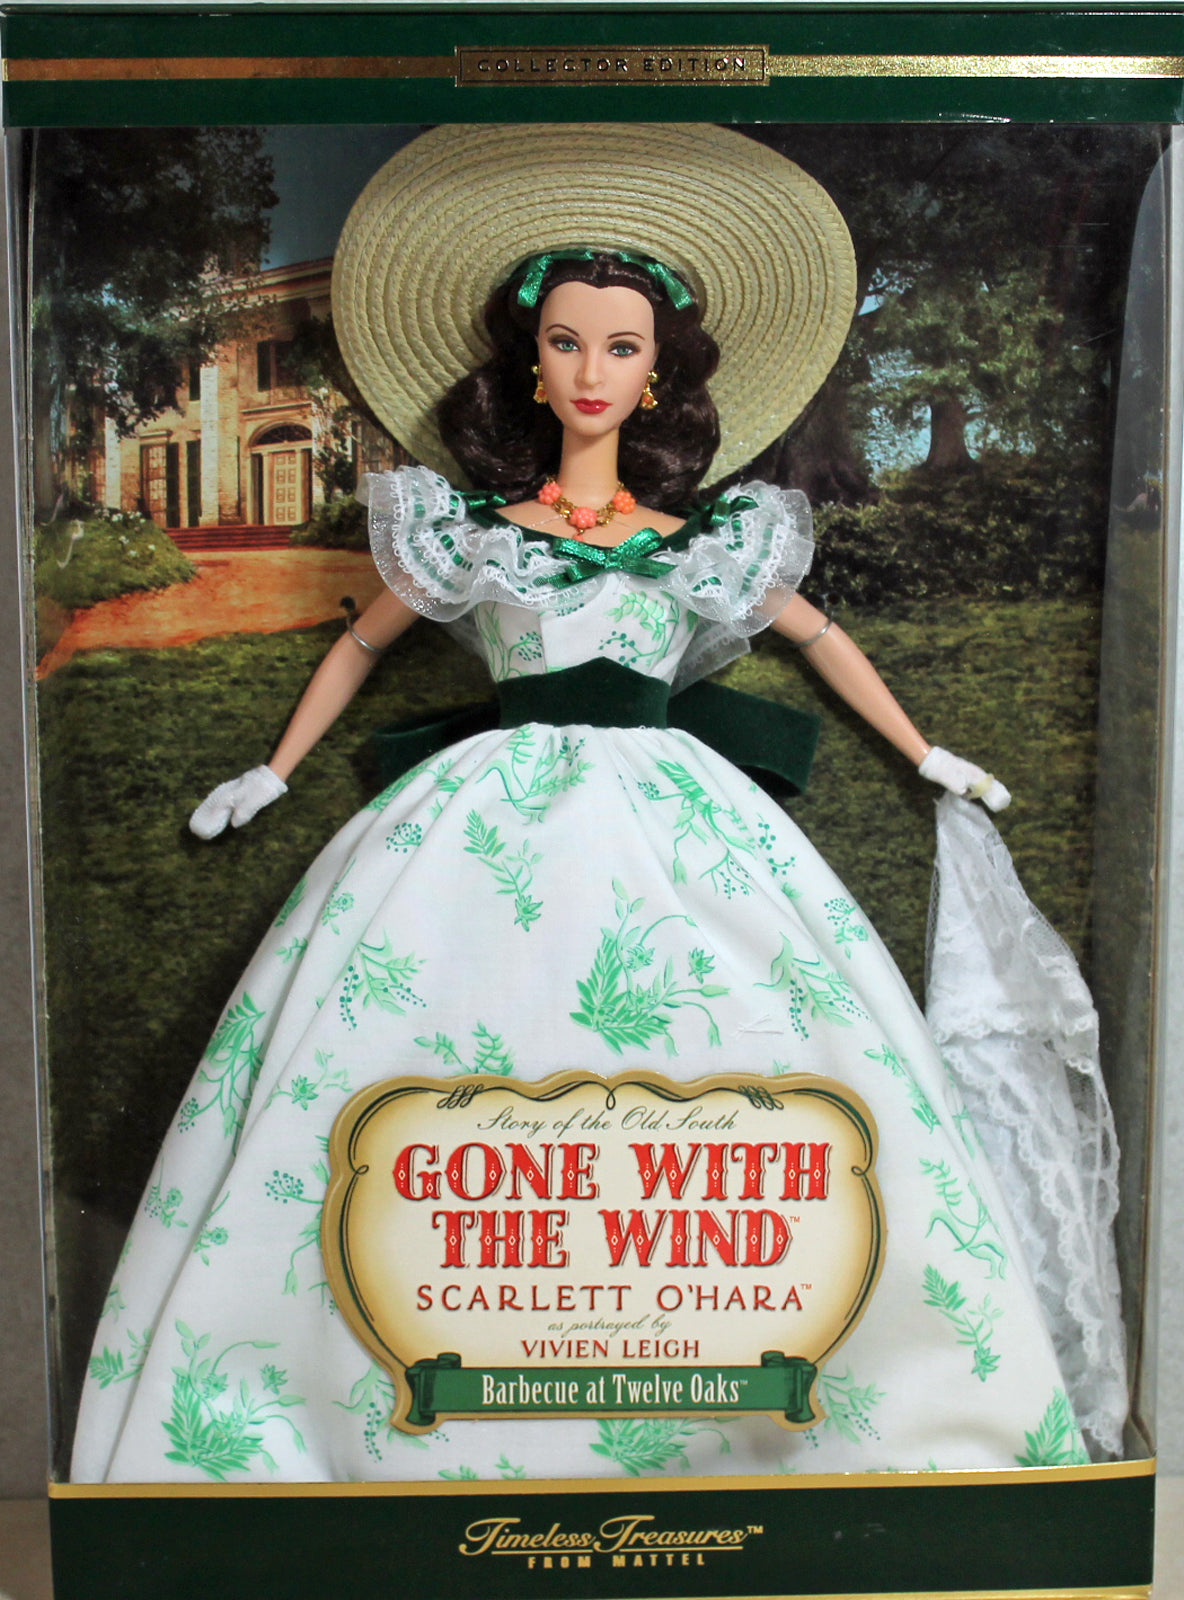 Scarlett O'Hara Doll - Gone With The wind - Barbecue At Twelve